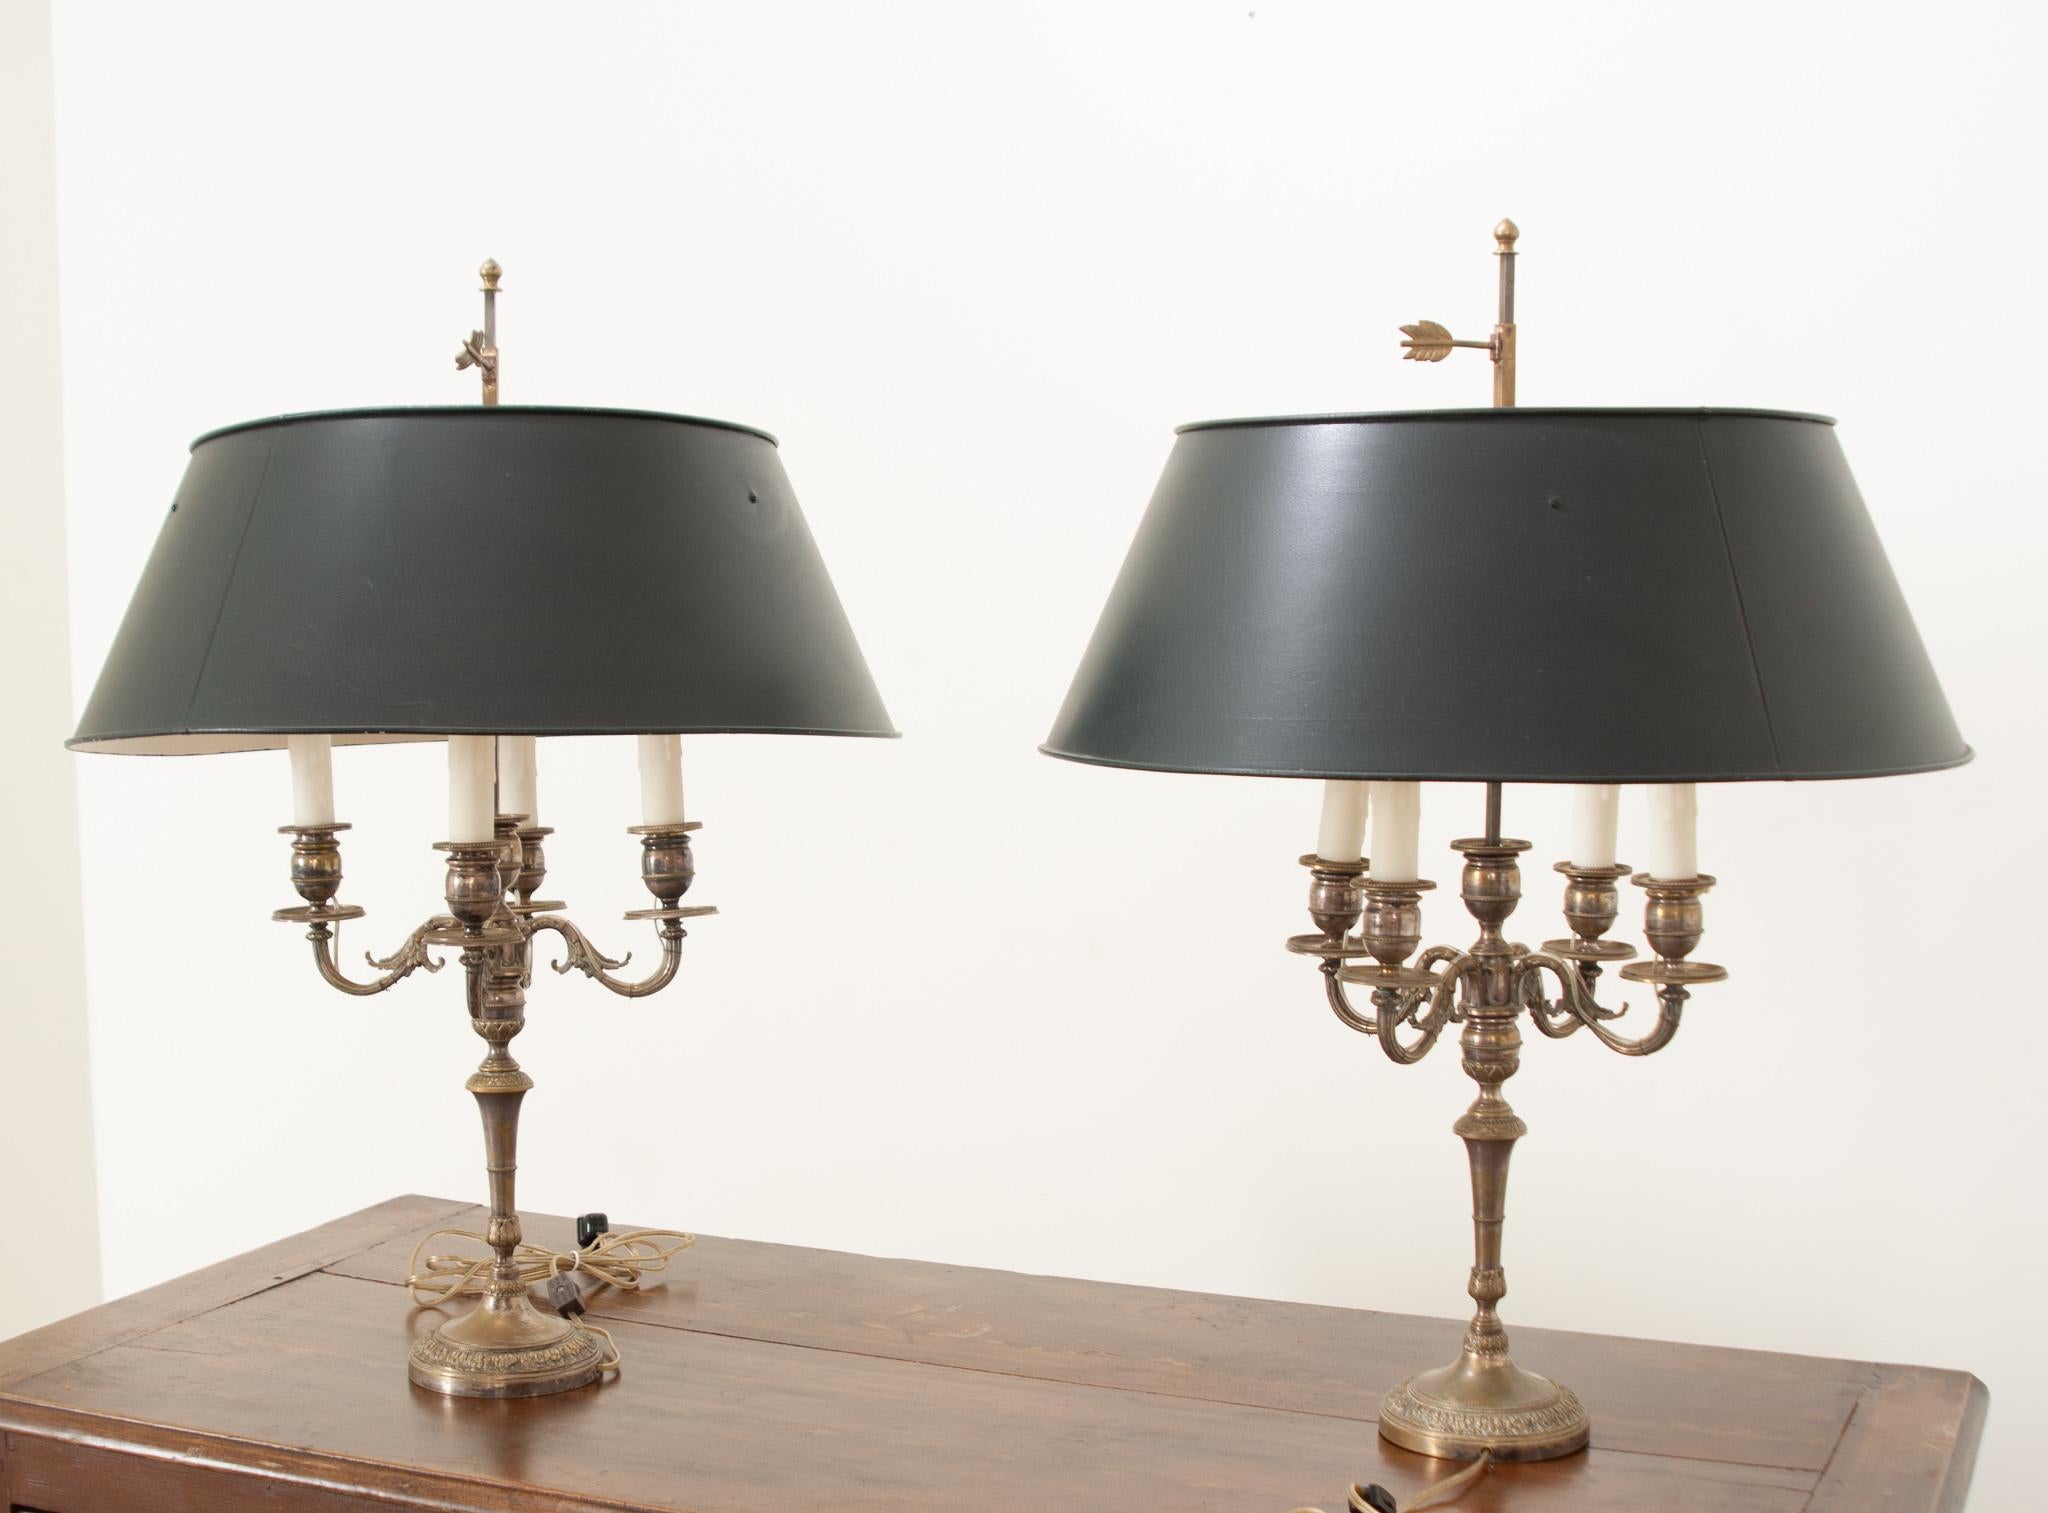 Pair of Candelabra Lamps in the Bouillotte Style For Sale 4